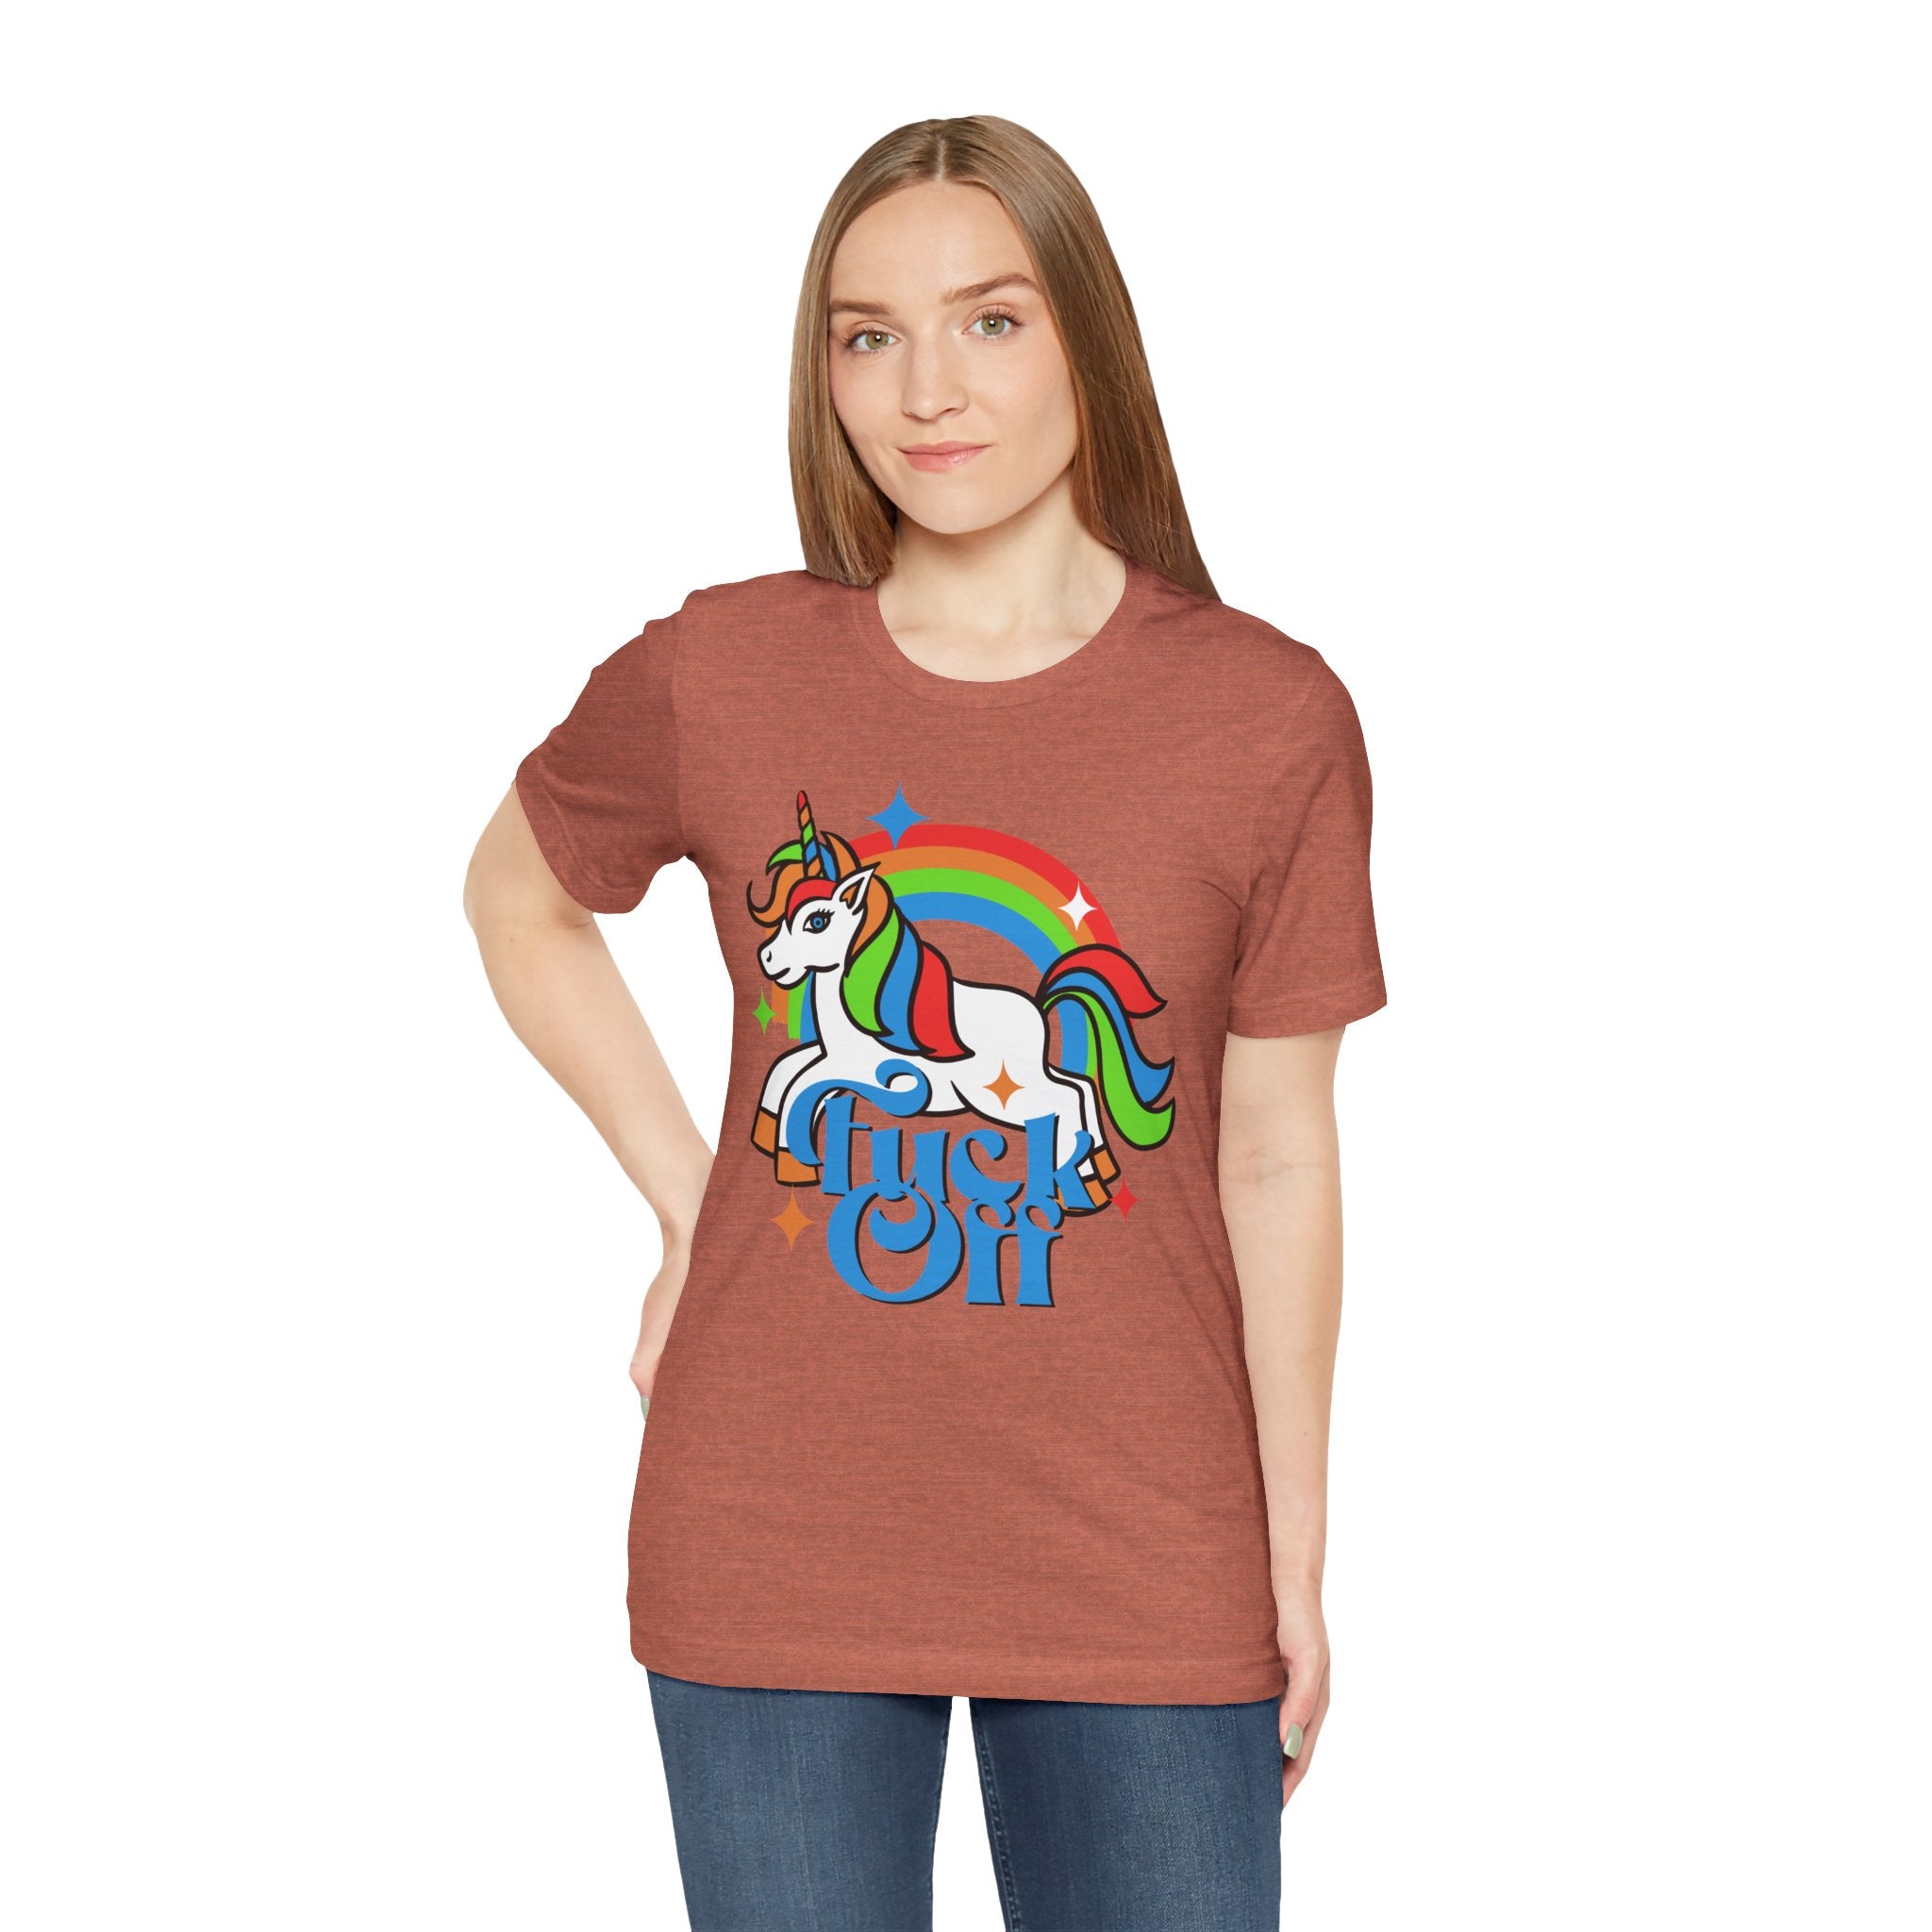 Woman in a cotton brown F off T-shirt featuring a colorful unicorn design above the words "gush off" under a rainbow.